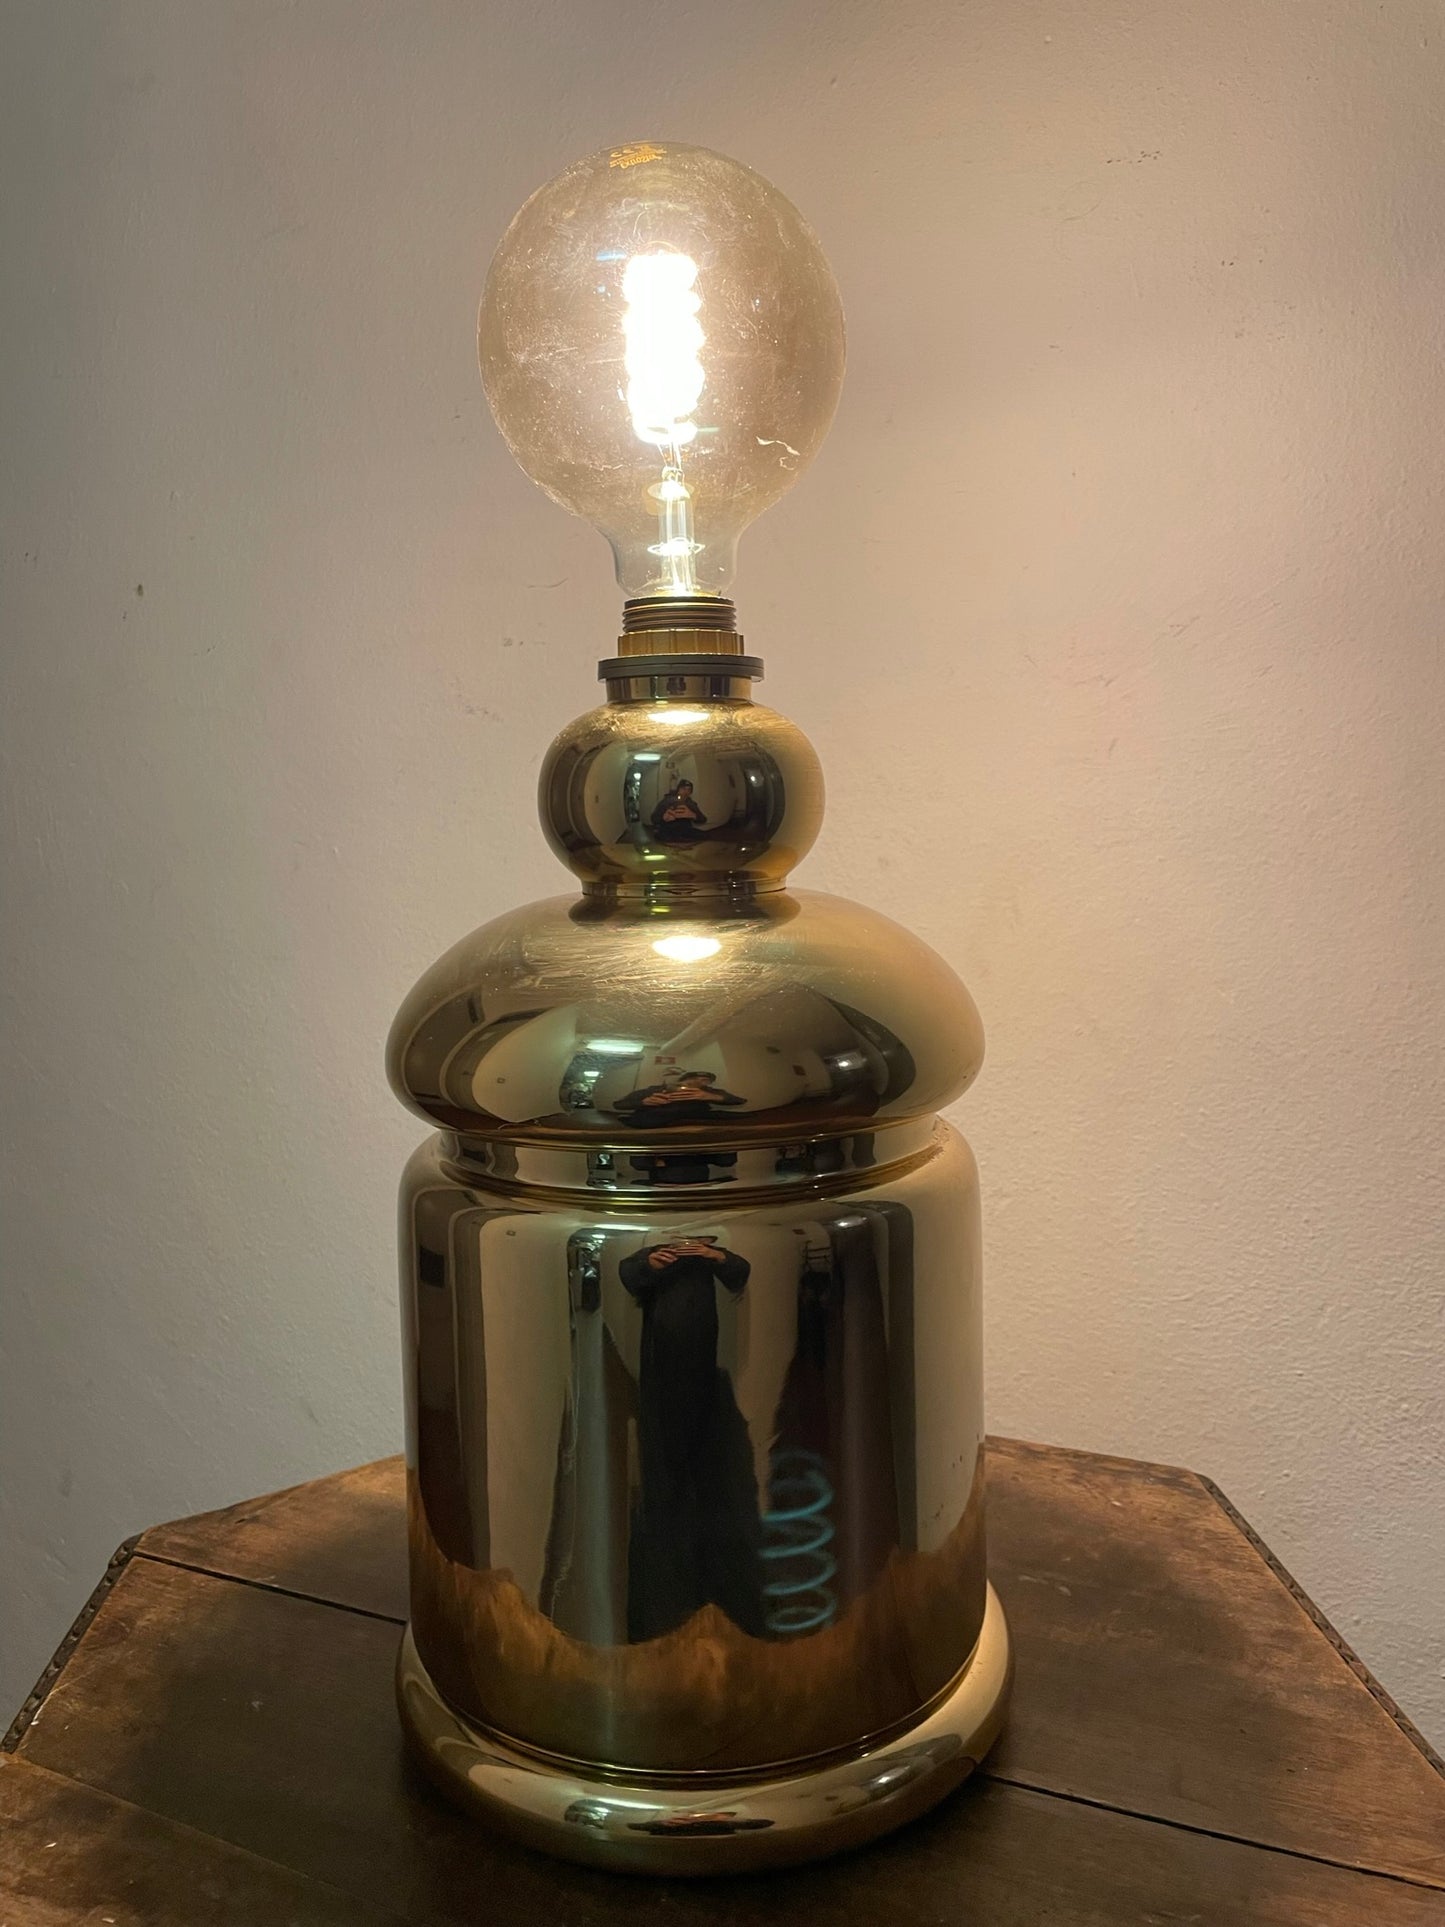 Brass-plated table lamp